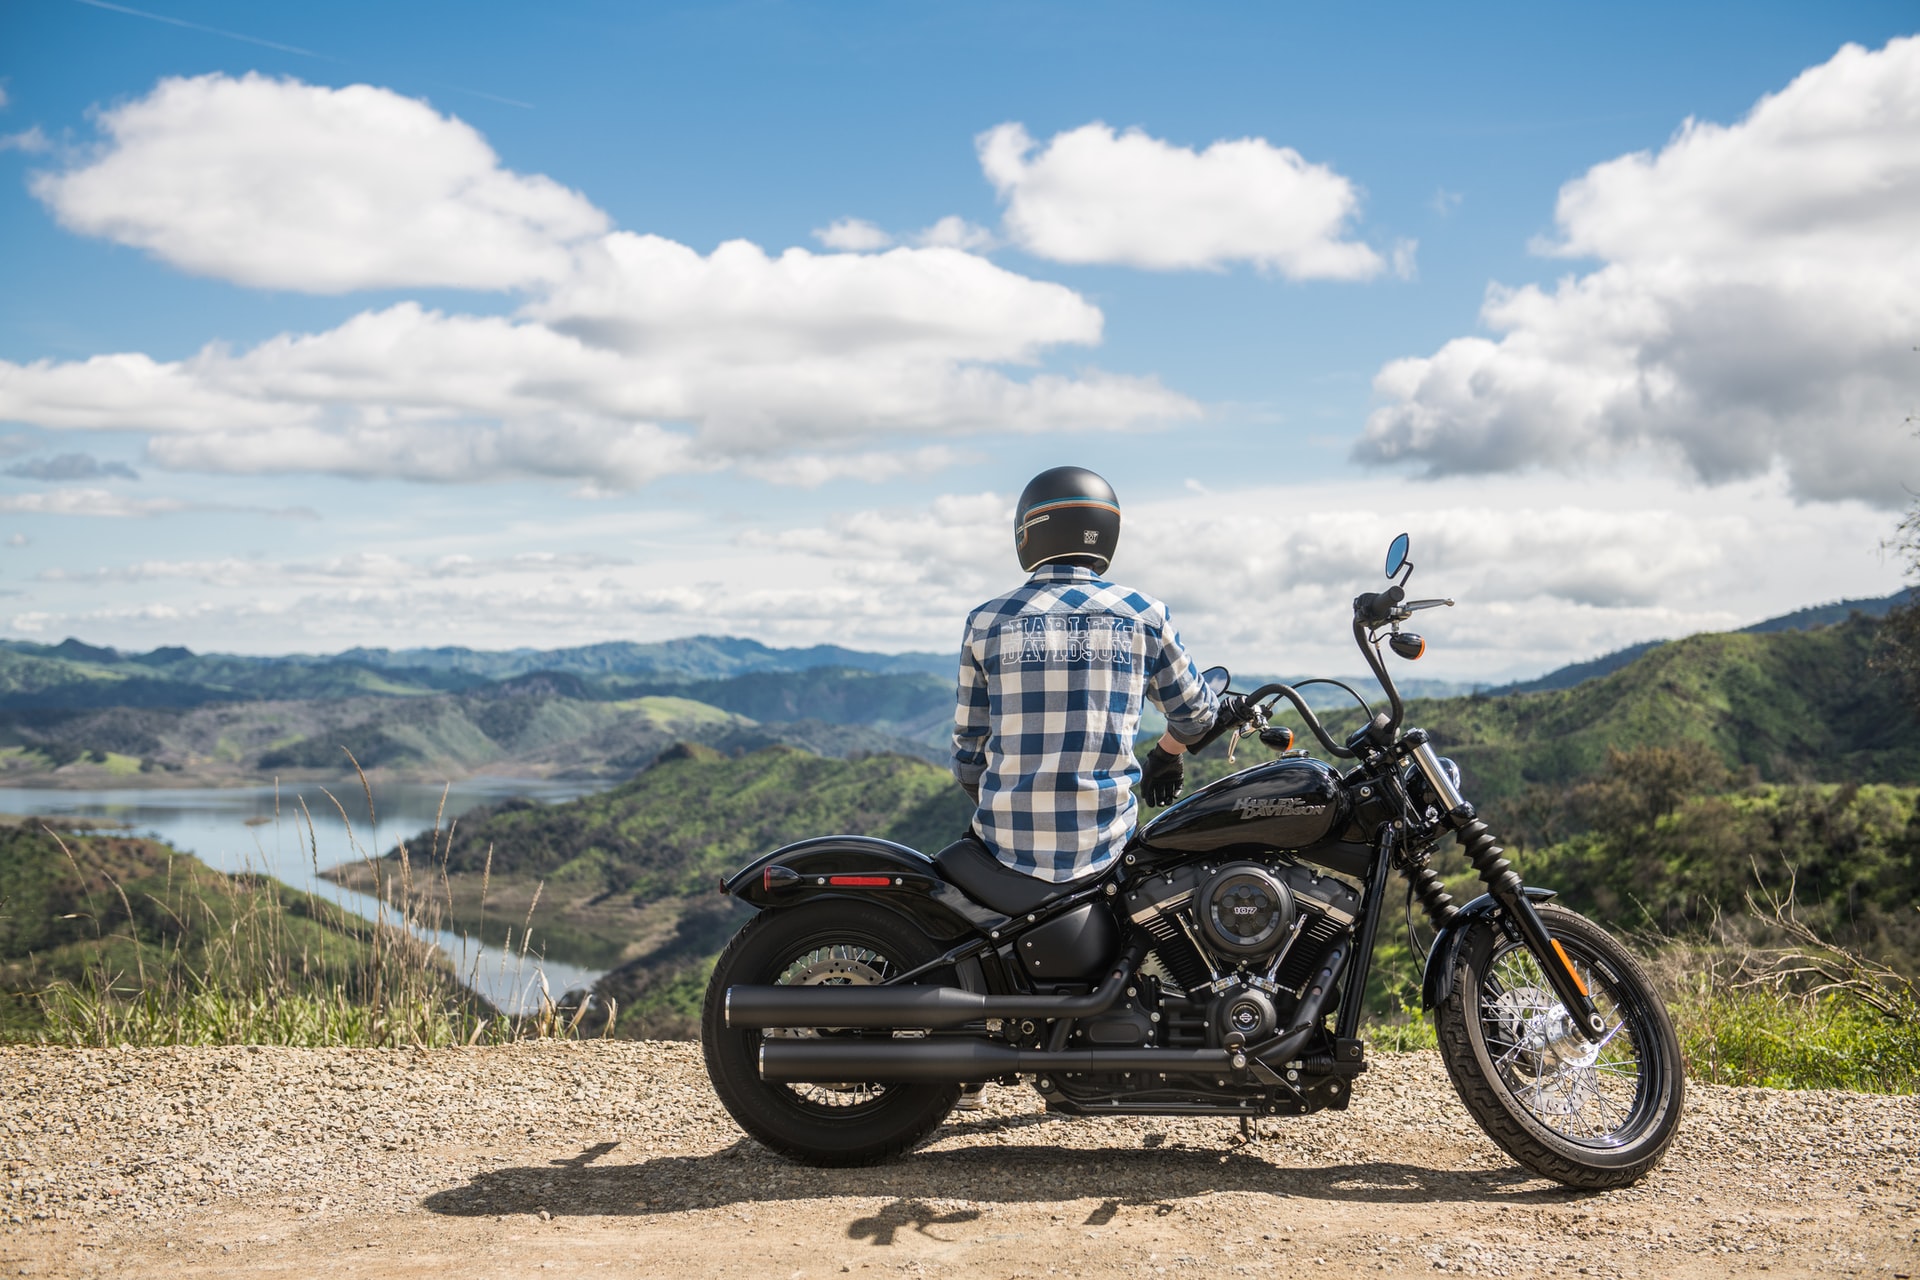 Can You Refinance A Motorcycle Loan? | Banks.com